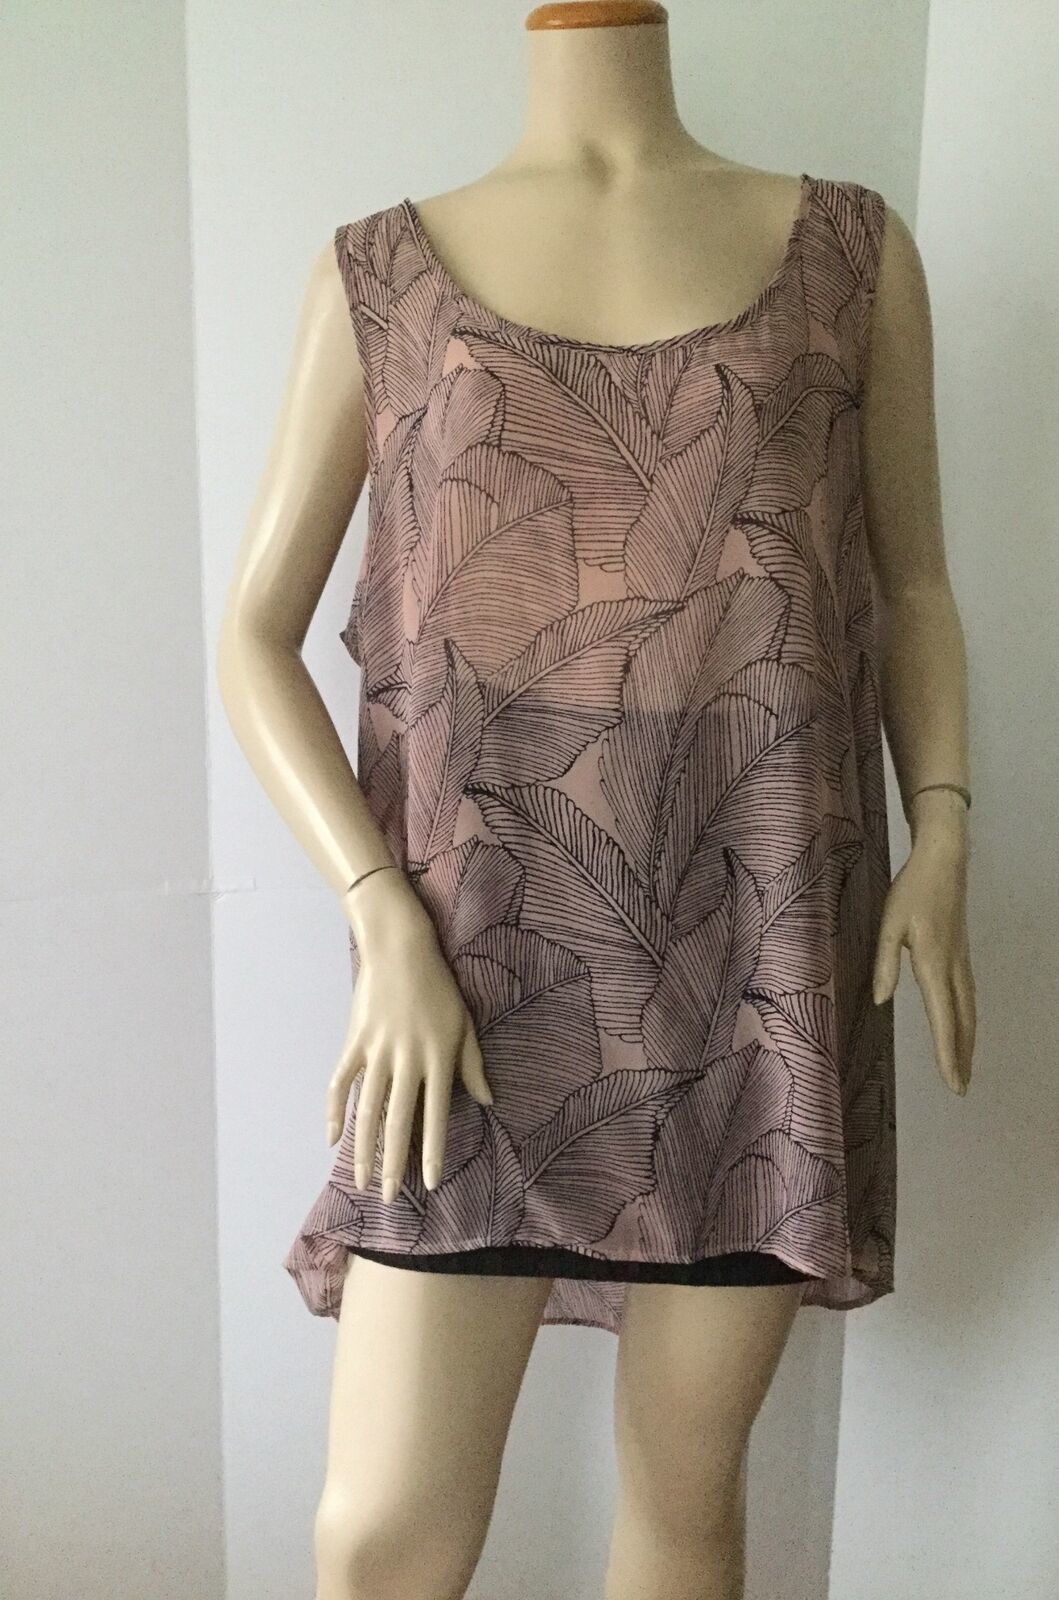 Primary image for TORRID Sheer Sleeveless Top Blush Shade w/Navy Blue Leaf Print (Size 3/XXXL)